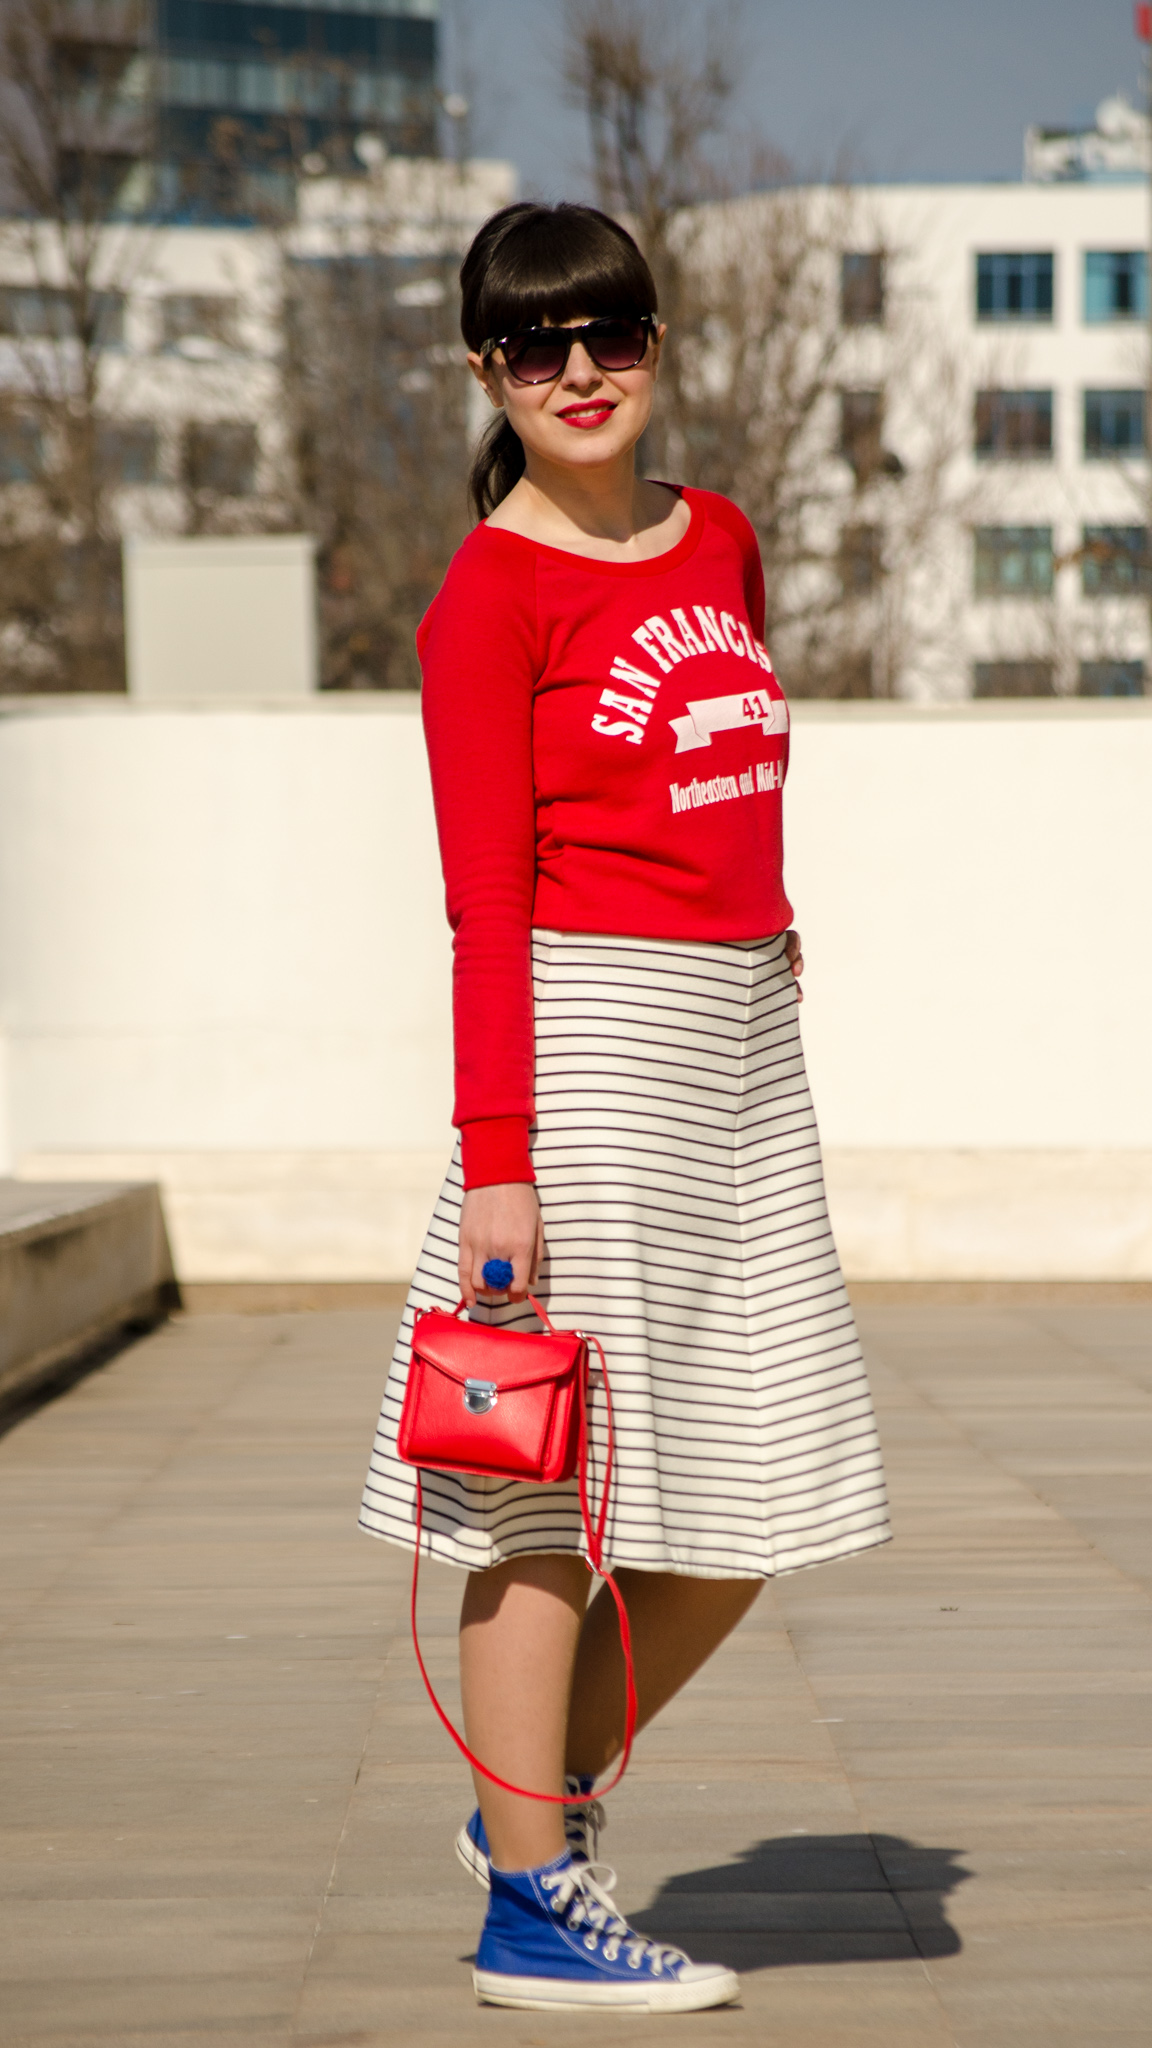 sport red top koton zara striped skirt stripes navy look red bag satchel cobalt blue sneakers converse spring outfit